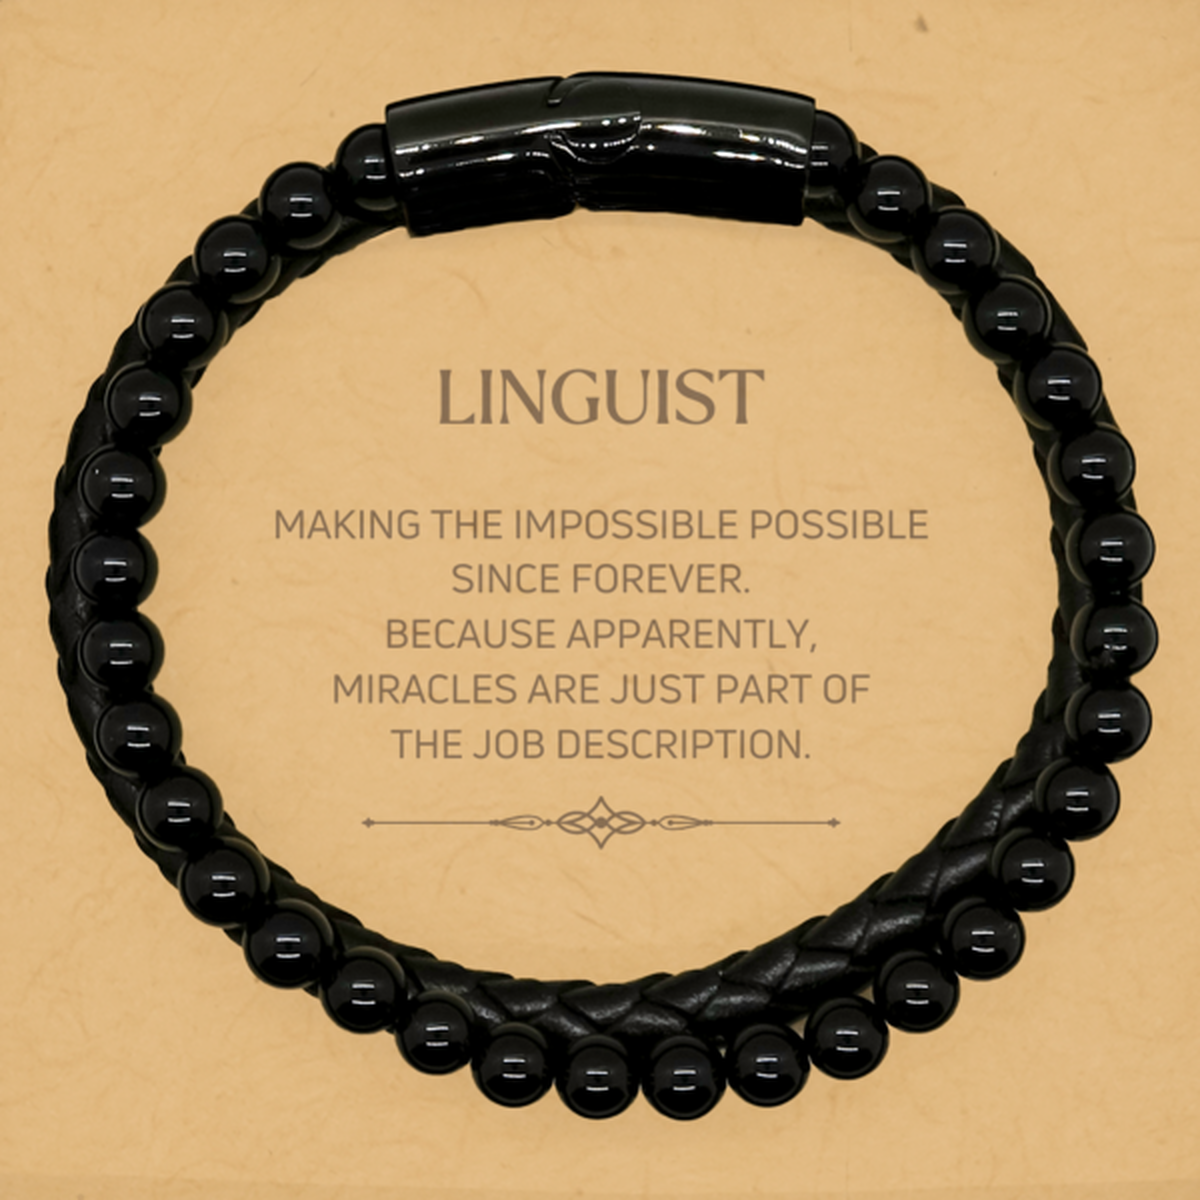 Funny Linguist Gifts, Miracles are just part of the job description, Inspirational Birthday Stone Leather Bracelets For Linguist, Men, Women, Coworkers, Friends, Boss